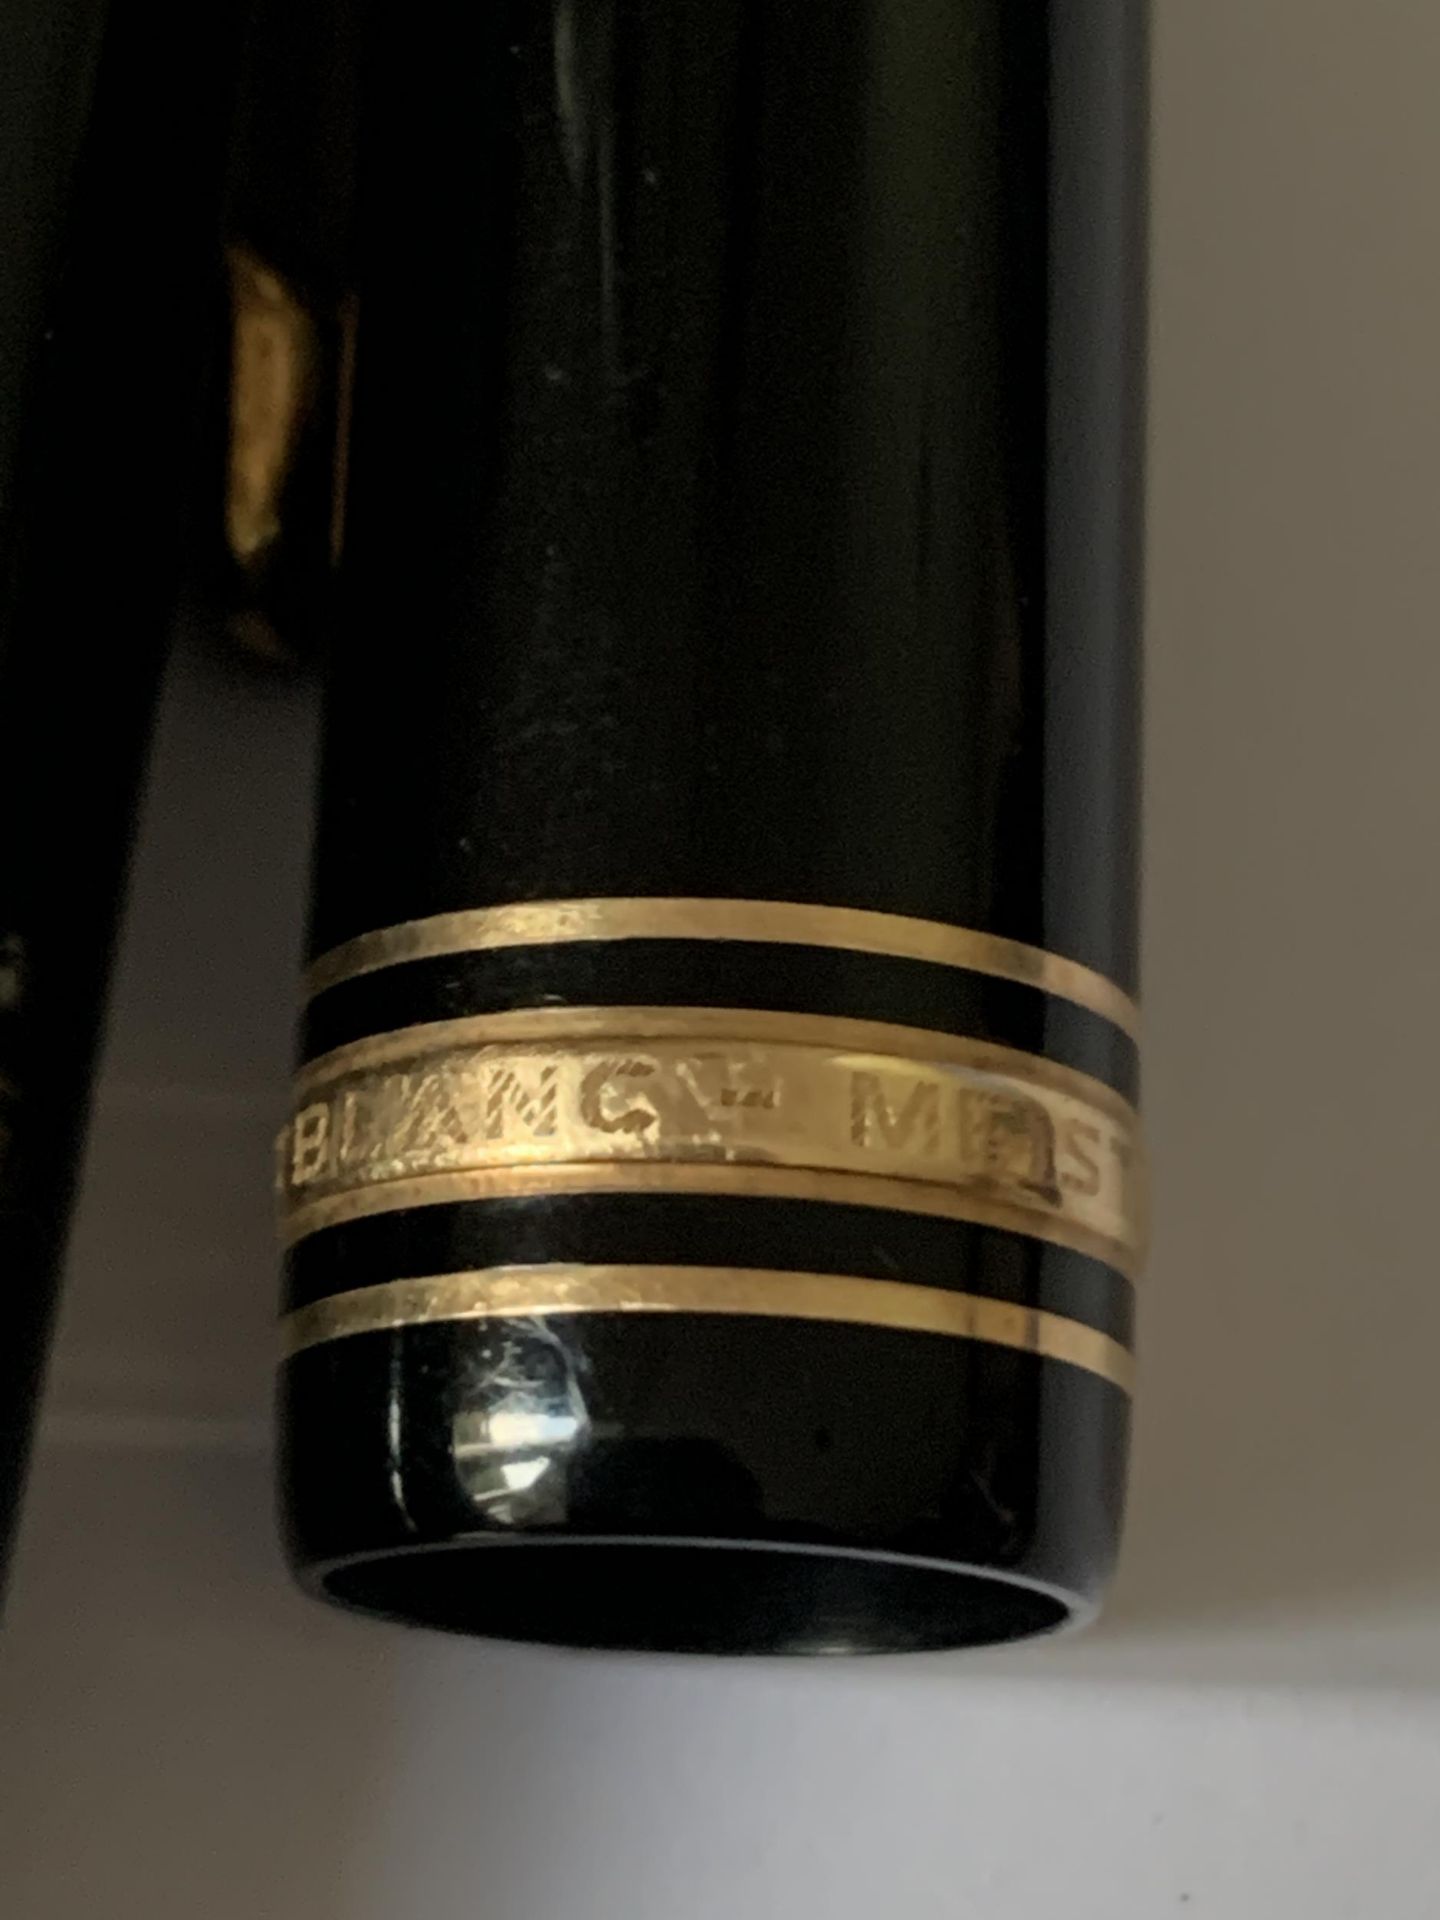 A MONT BLANC MEISTERSTUCK GOLD COATED LE GRAND FOUNTAIN PEN WITH 18 CARAT GOLD MEDIUM NIB - Image 6 of 8